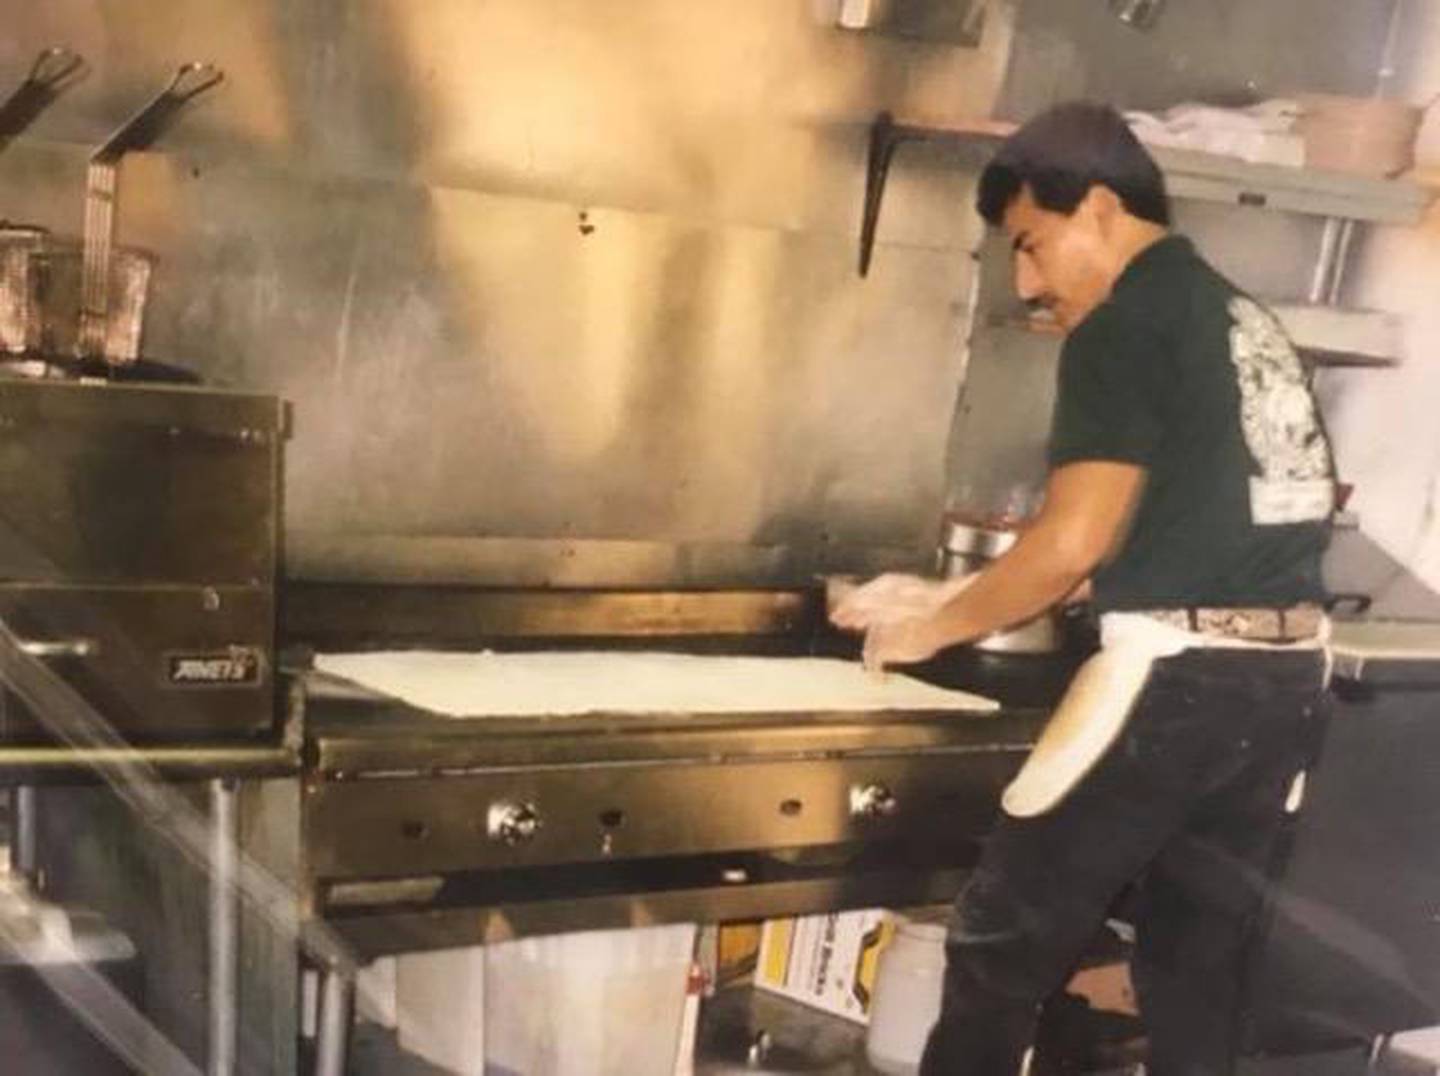 Raul Briseno Sr. makes one of his famous 6-foot burritos at Raul's Burrito Express in Wauconda in this 1996 photo, when Briseno was 31. The restaurant's slogan was "Home of the 6-foot burrito," which Briseno would make for parties. It was Briseno's first restaurant.